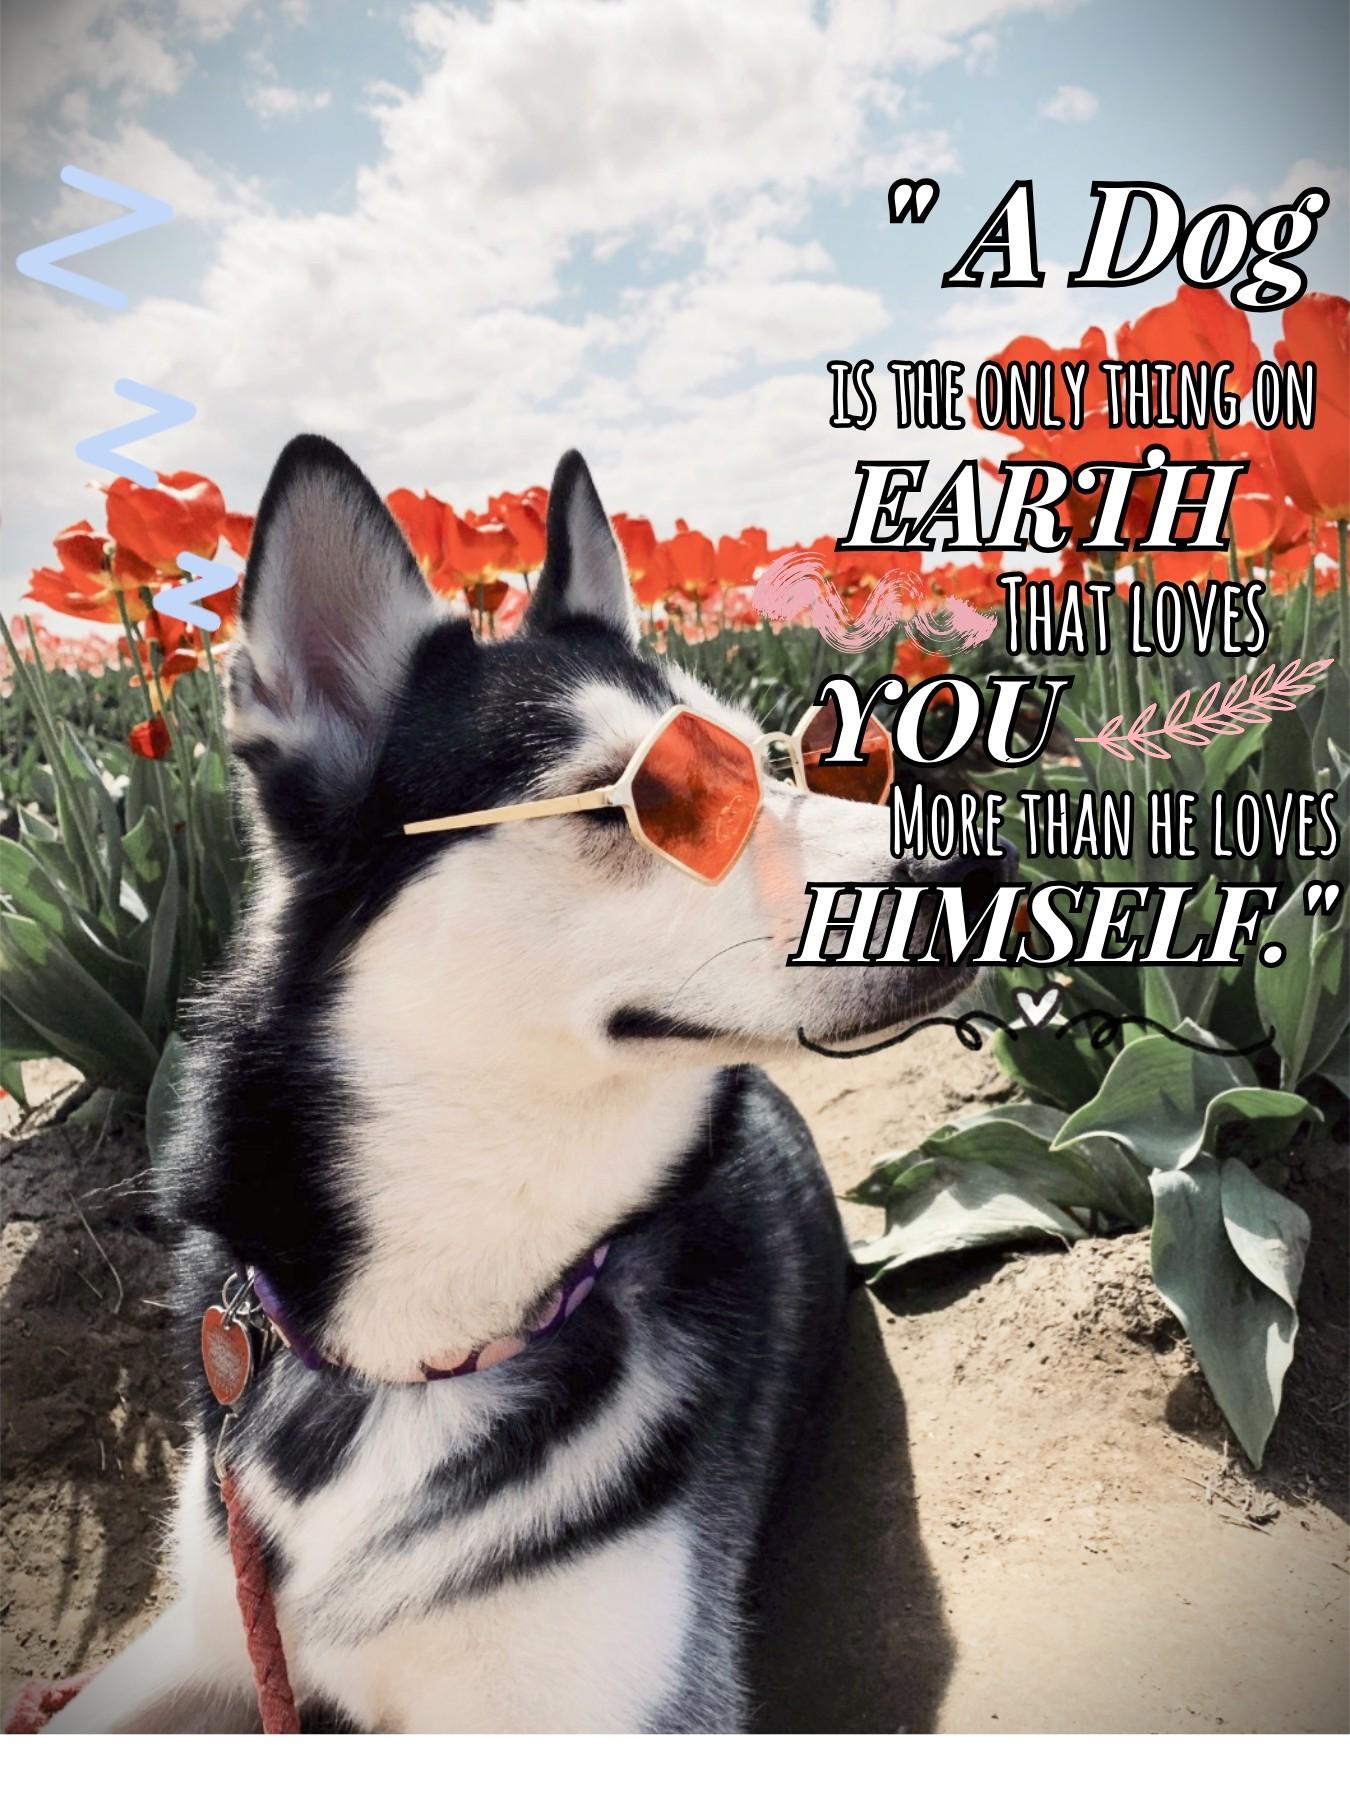 💕(tap)💕

Remix if you love dogs!!
:)))